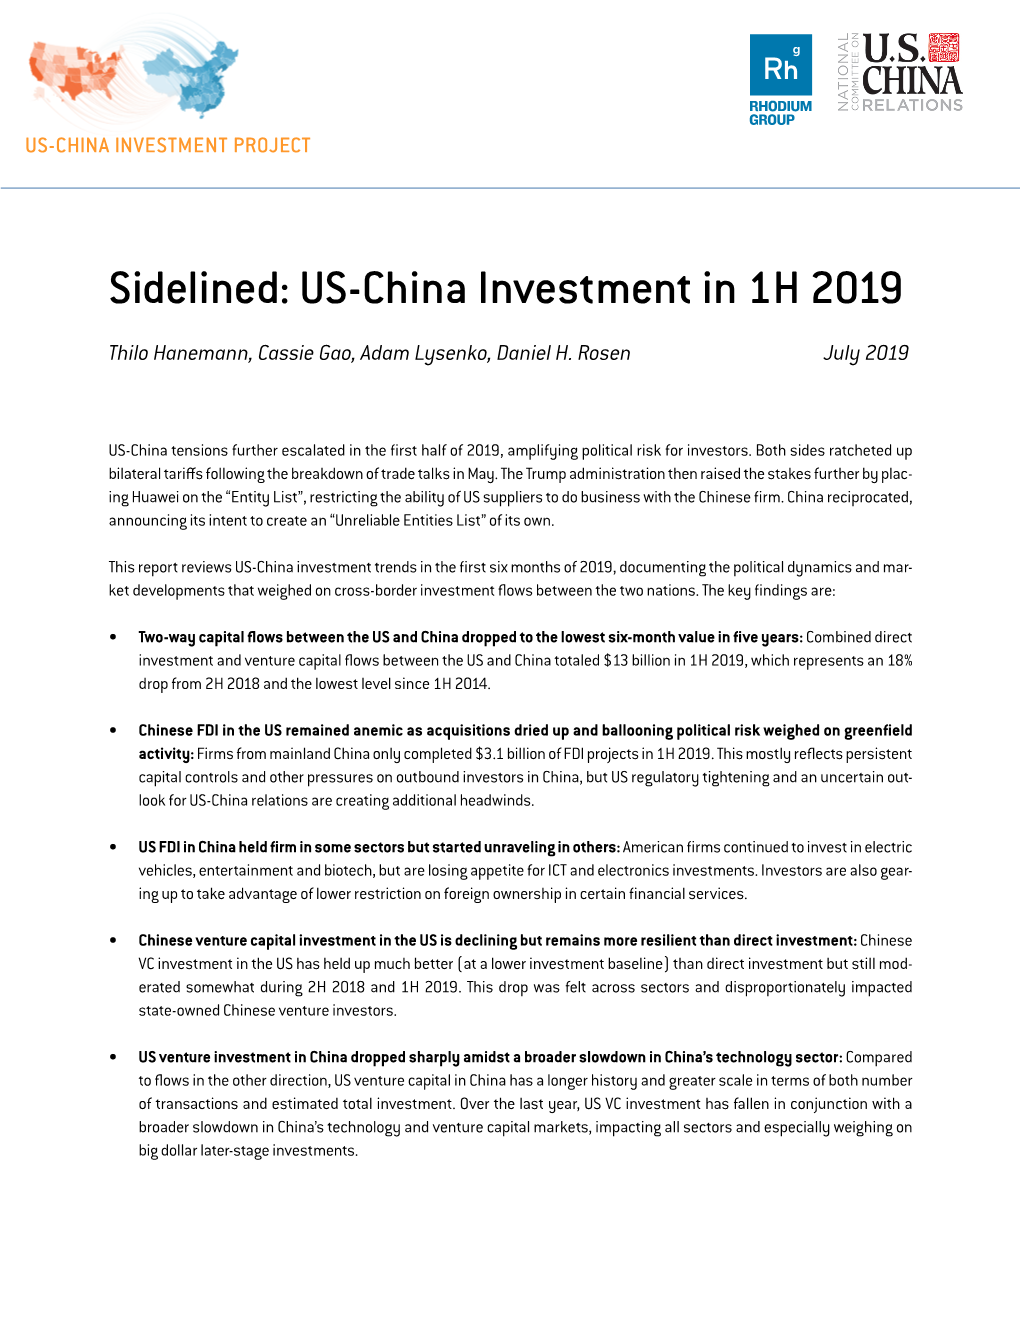 US-China Investment in 1H 2019